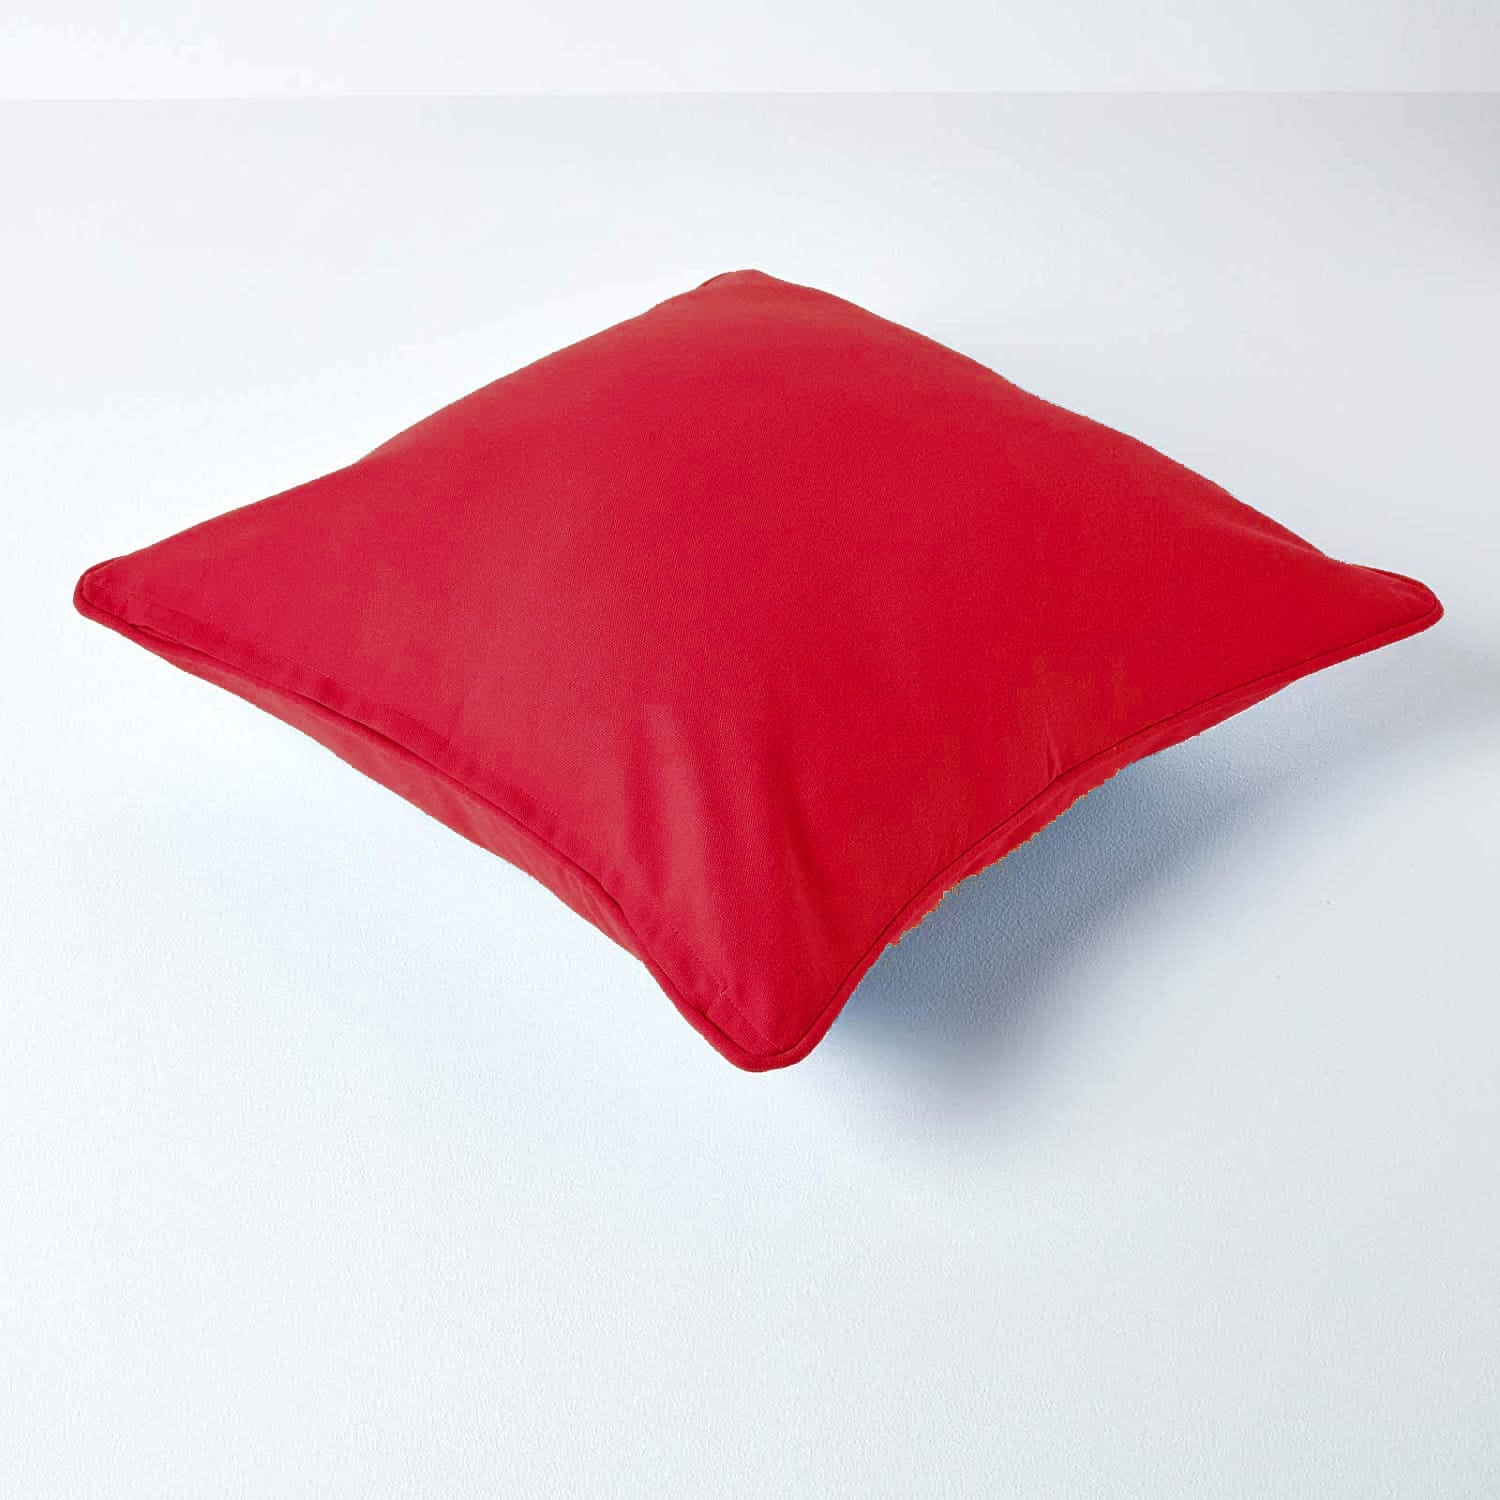 Plain Cotton Decorative Cushion Cover in Red online at best prices